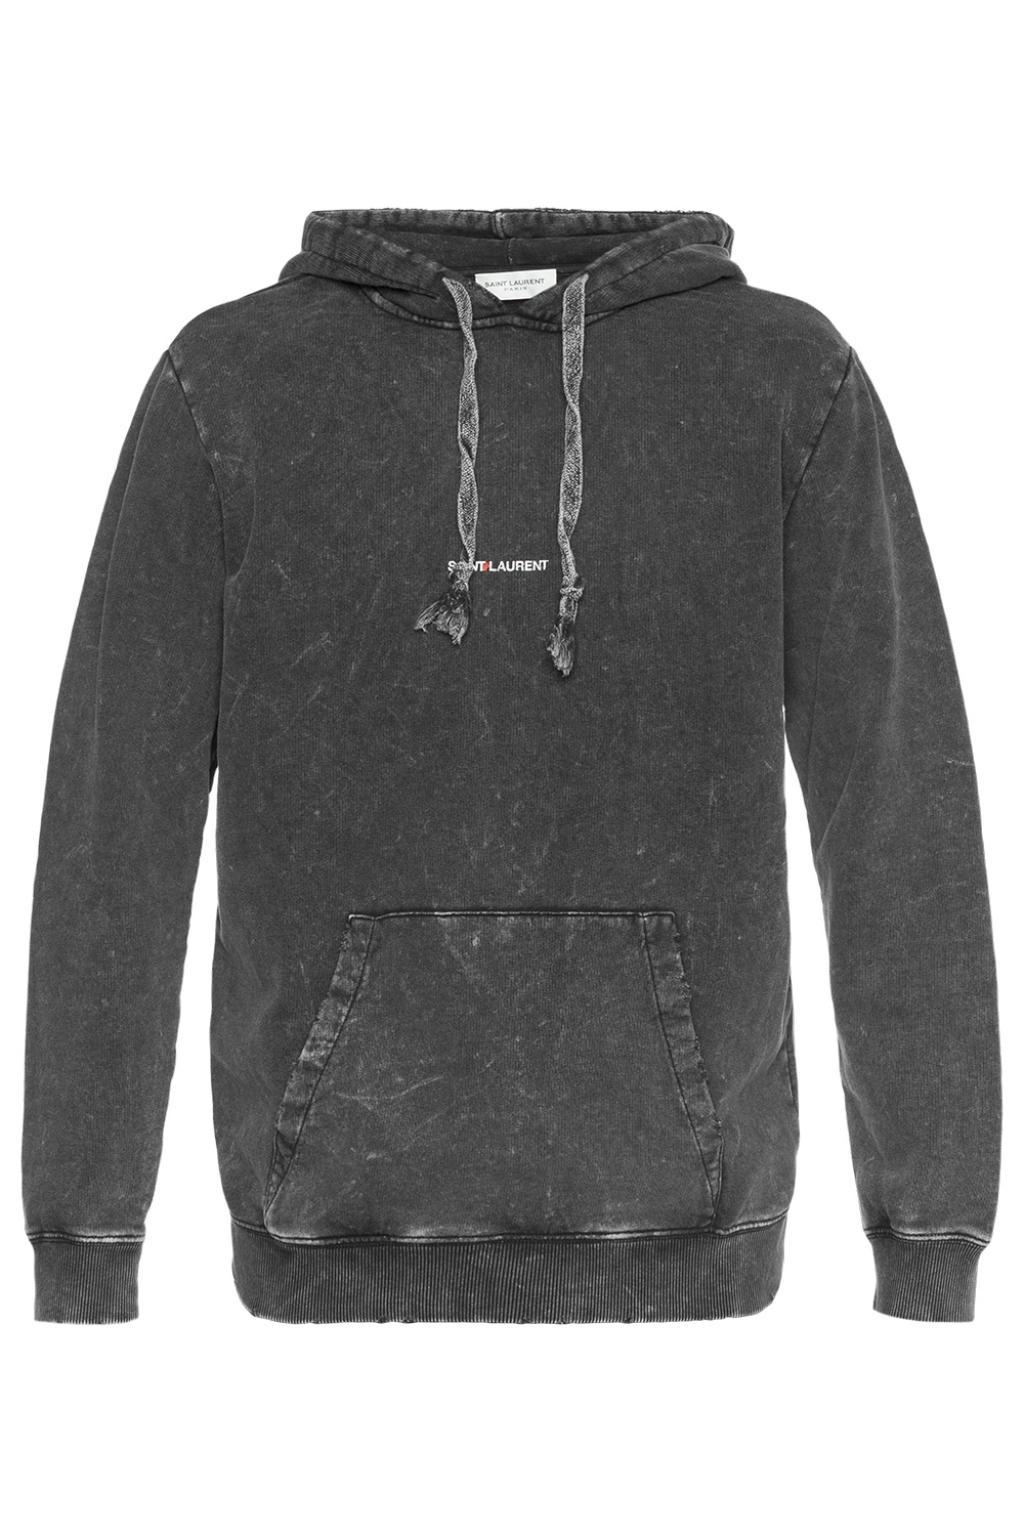 Saint Laurent Cotton Grey Stone Washed Hoodie By in Steel Grey (Gray ...